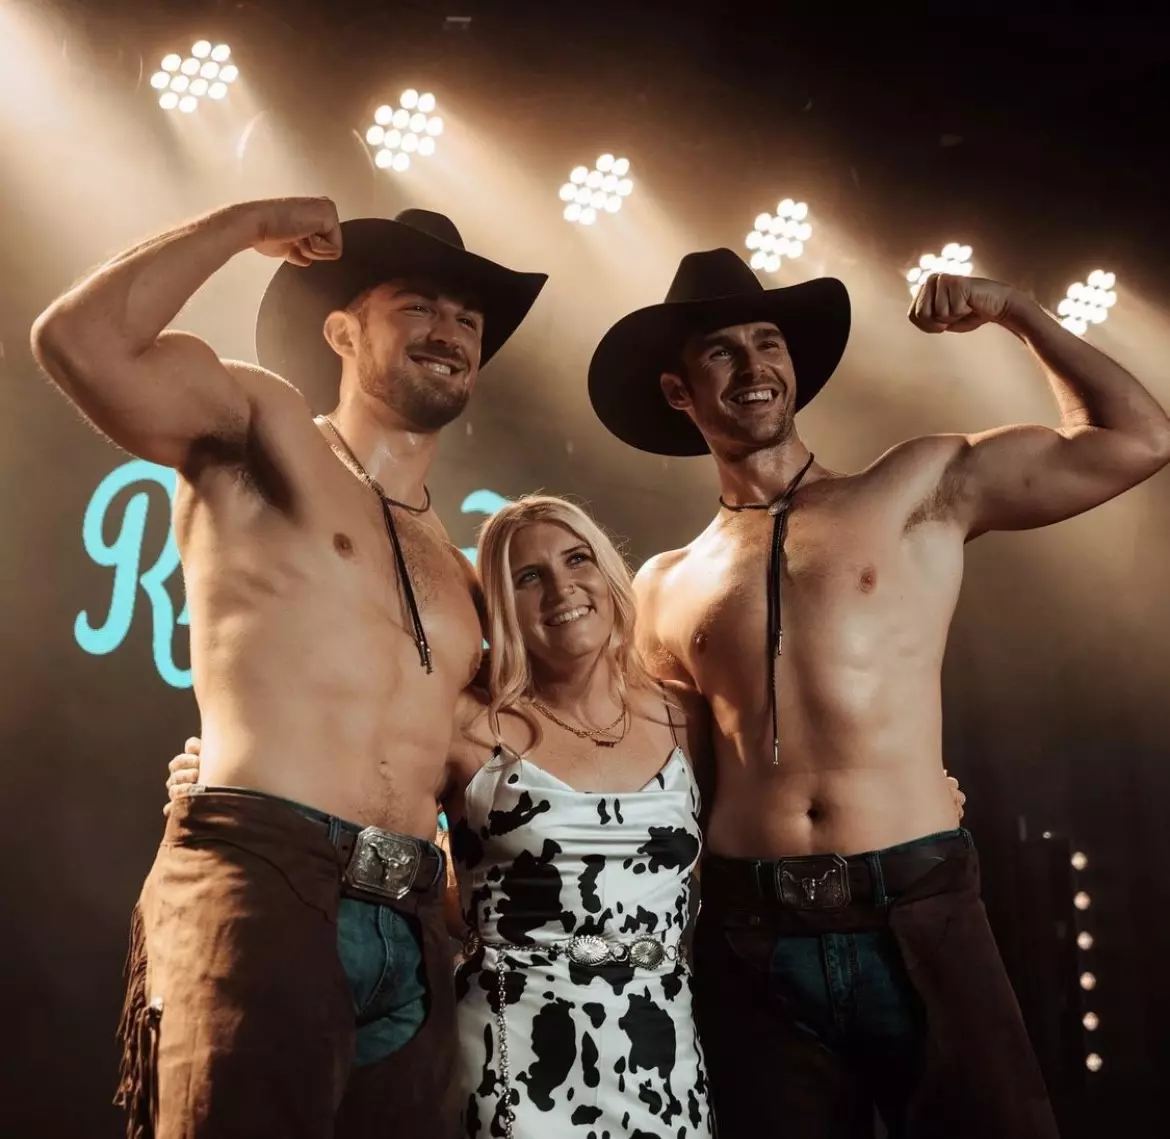 Ranch Hands: Nashville's Shirtless, Dancing Cowboy Show is a MUST